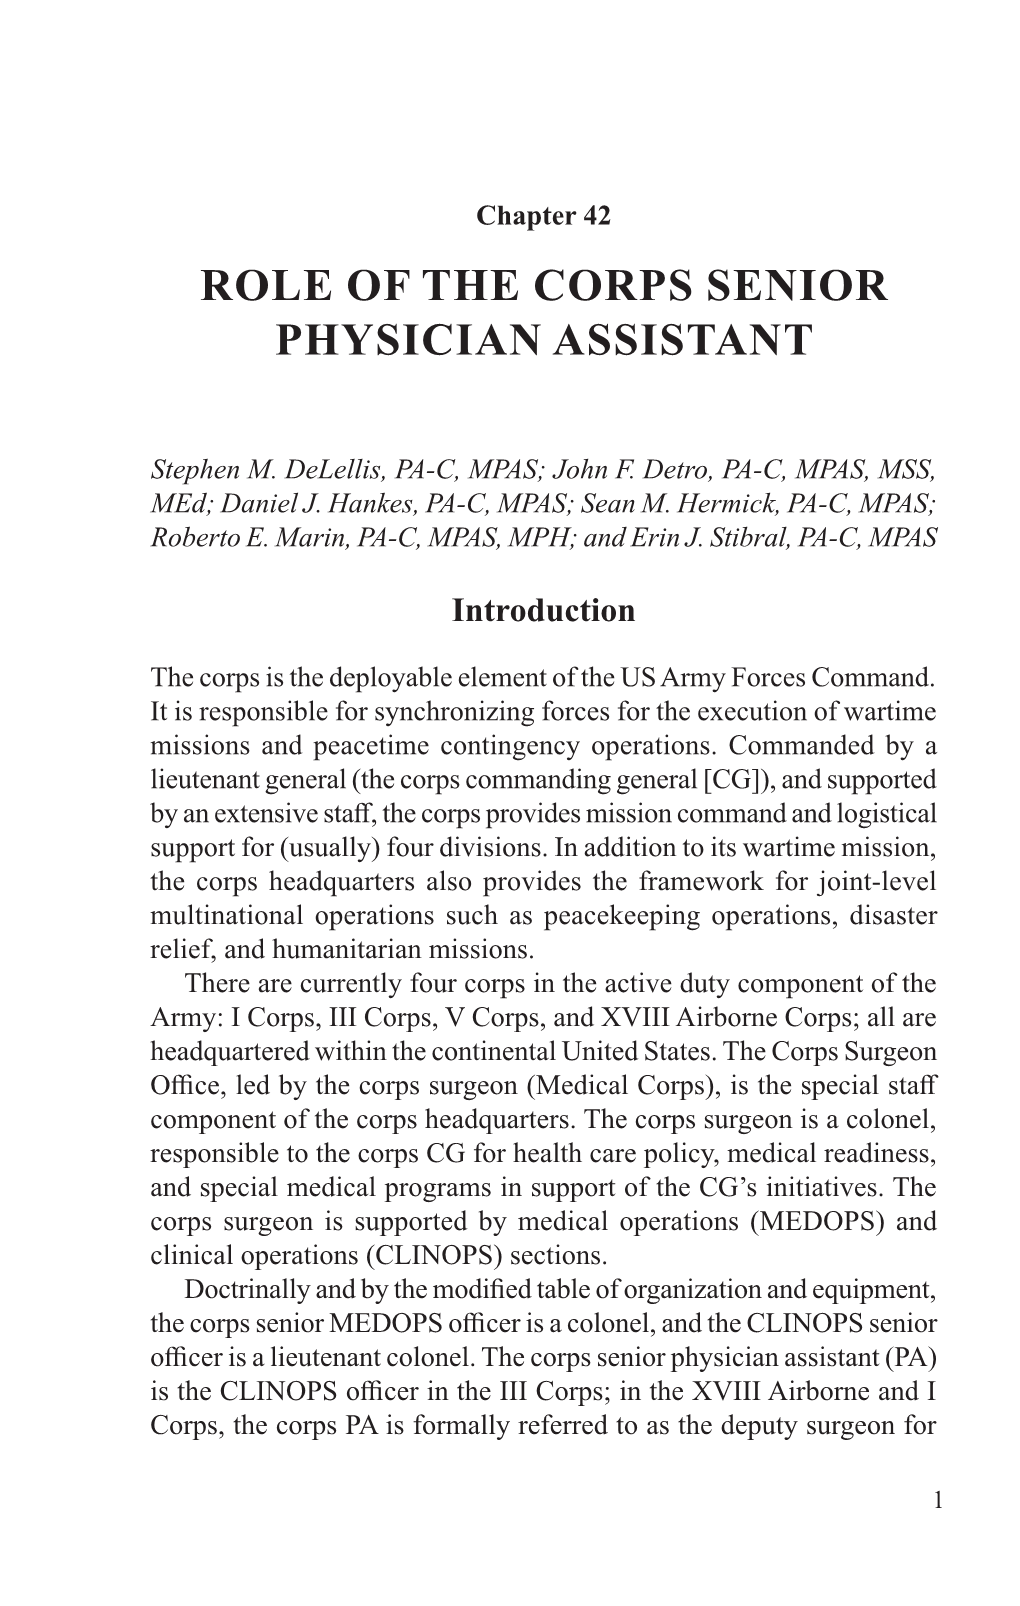 Role of the Corps Senior Physician Assistant